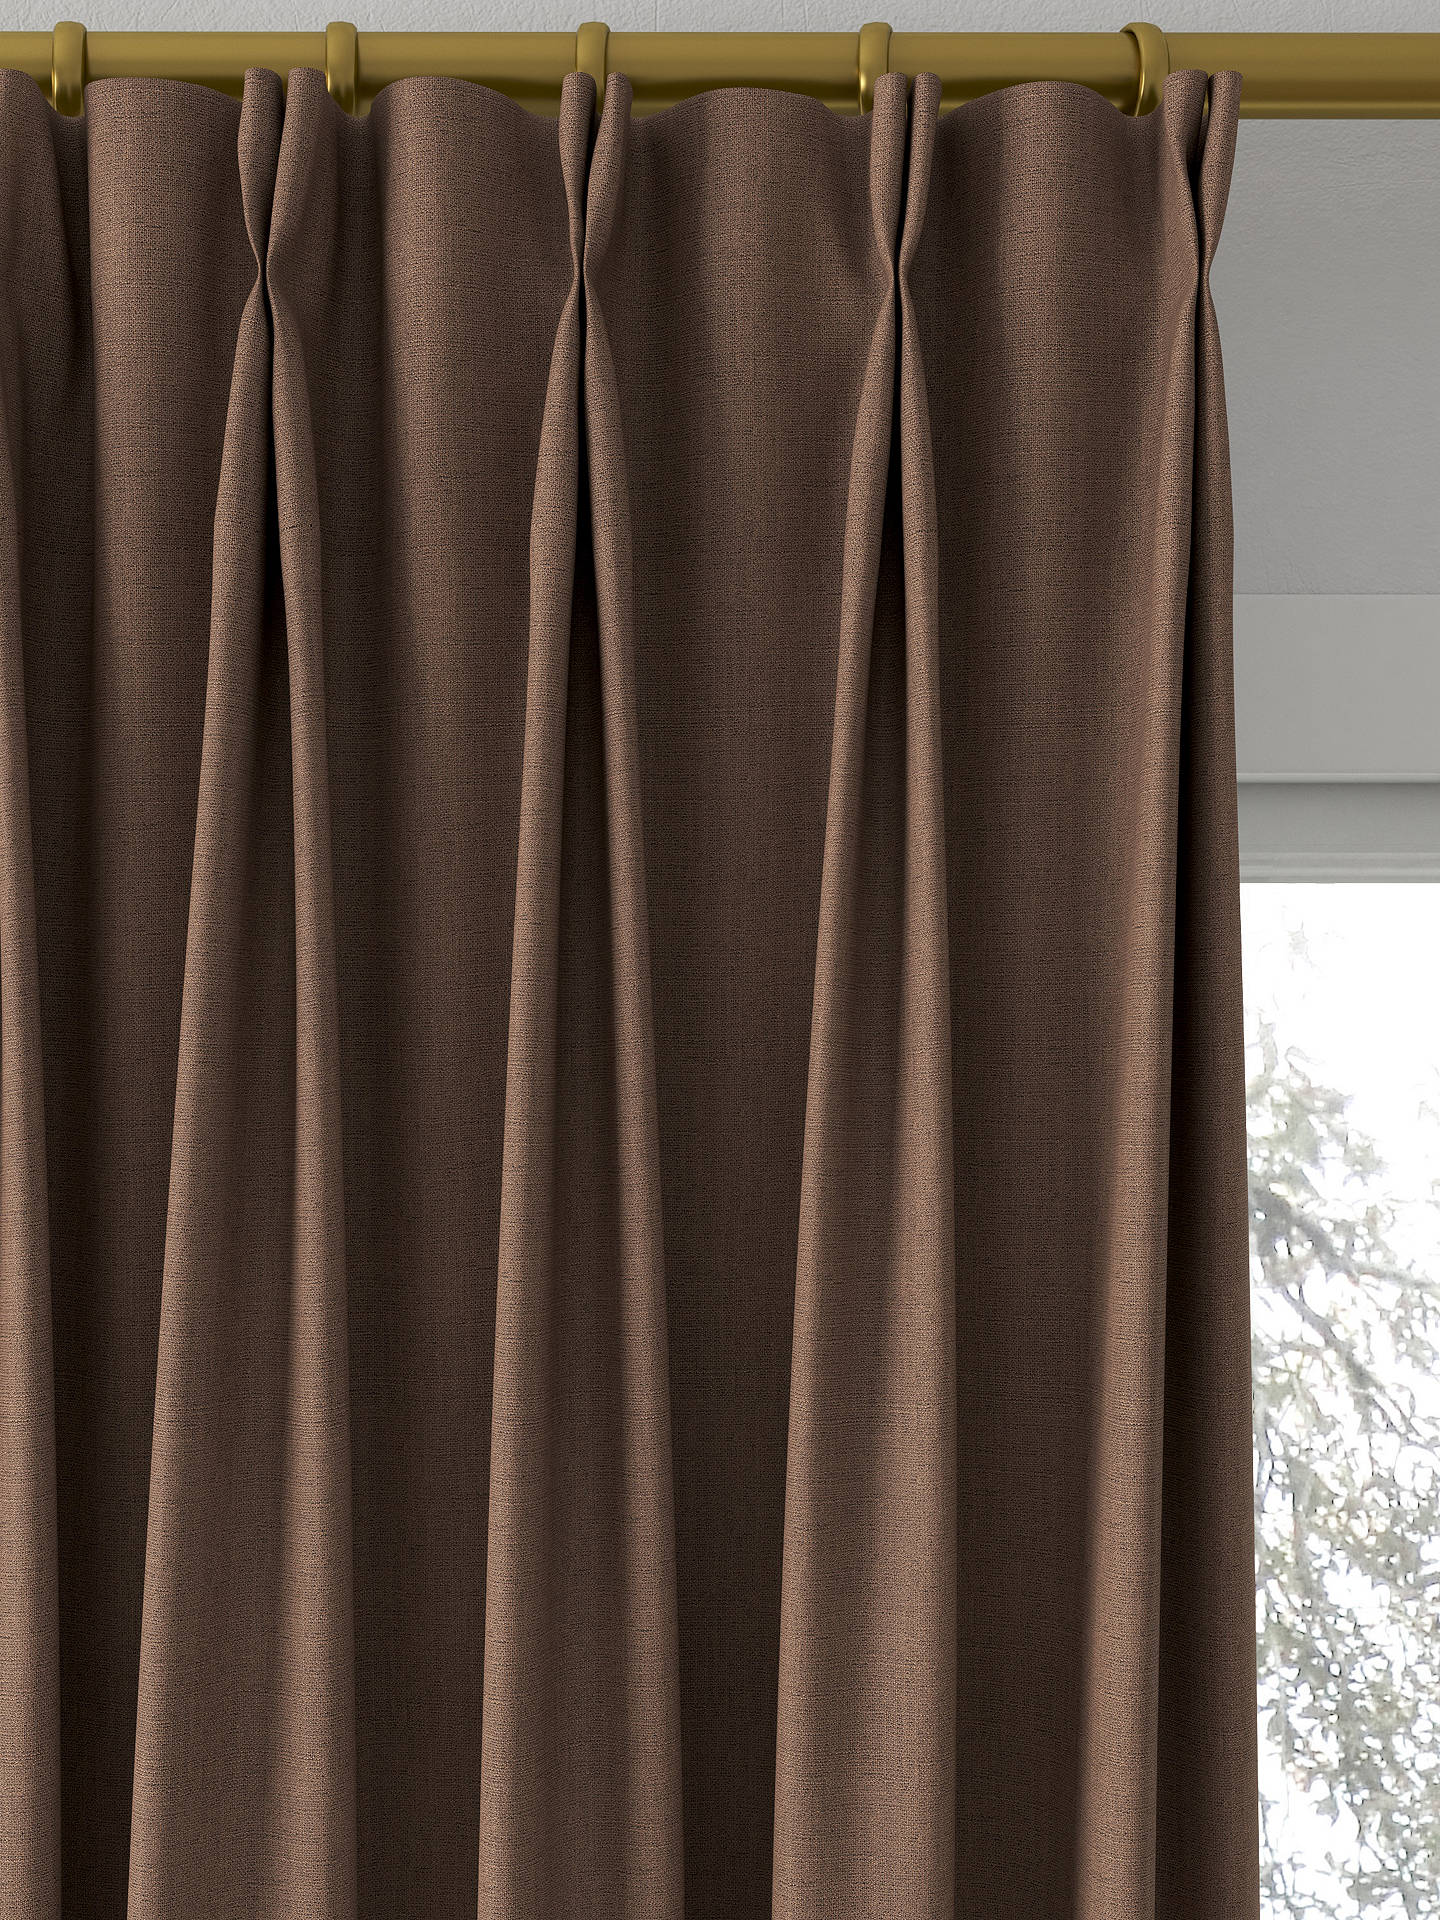 Sanderson Lagom Made to Measure Curtains, Earth